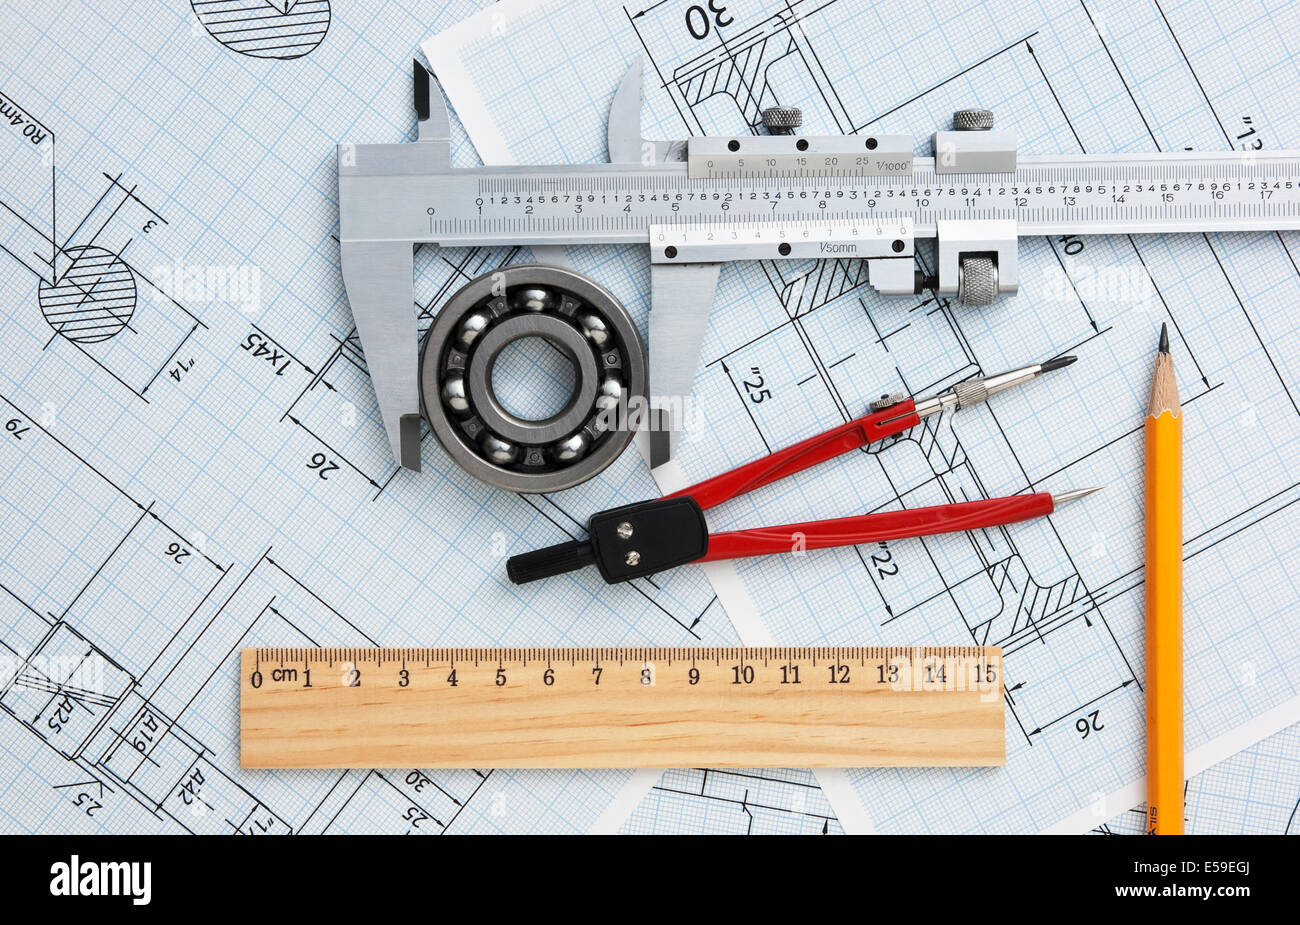 Technical Drawing Tools And Their Uses